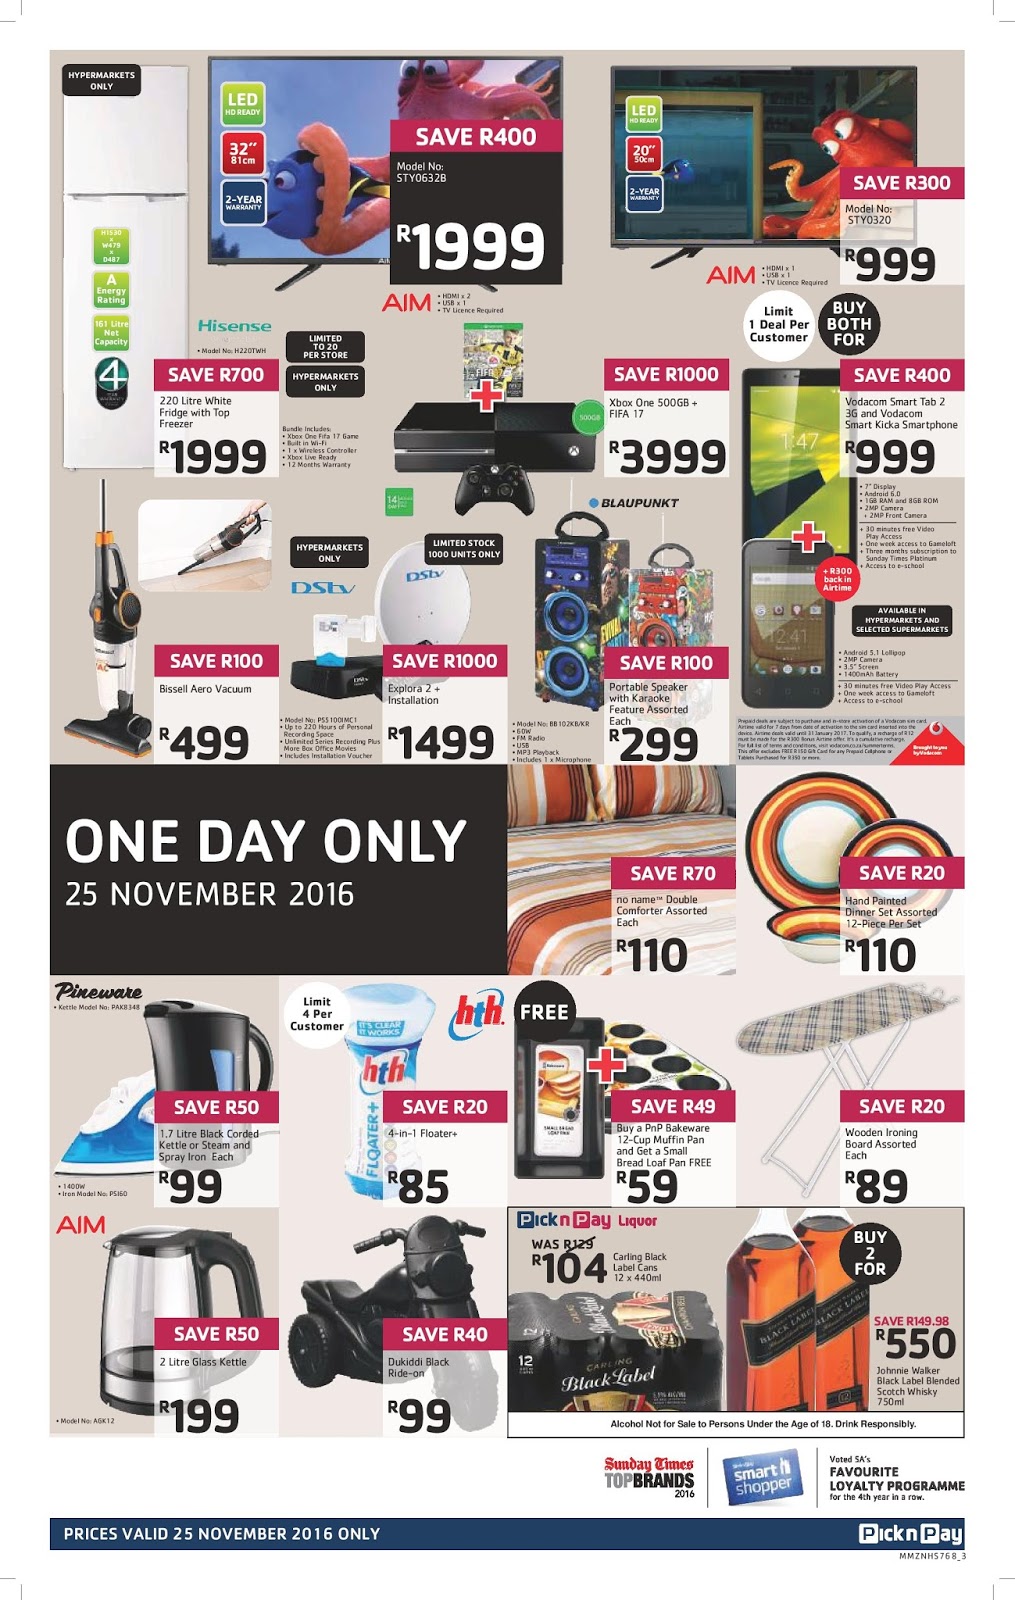 #BlackFriday Pick n Pay Top Best Black Friday Hot deals in South Africa (revealed) | The Edge Search